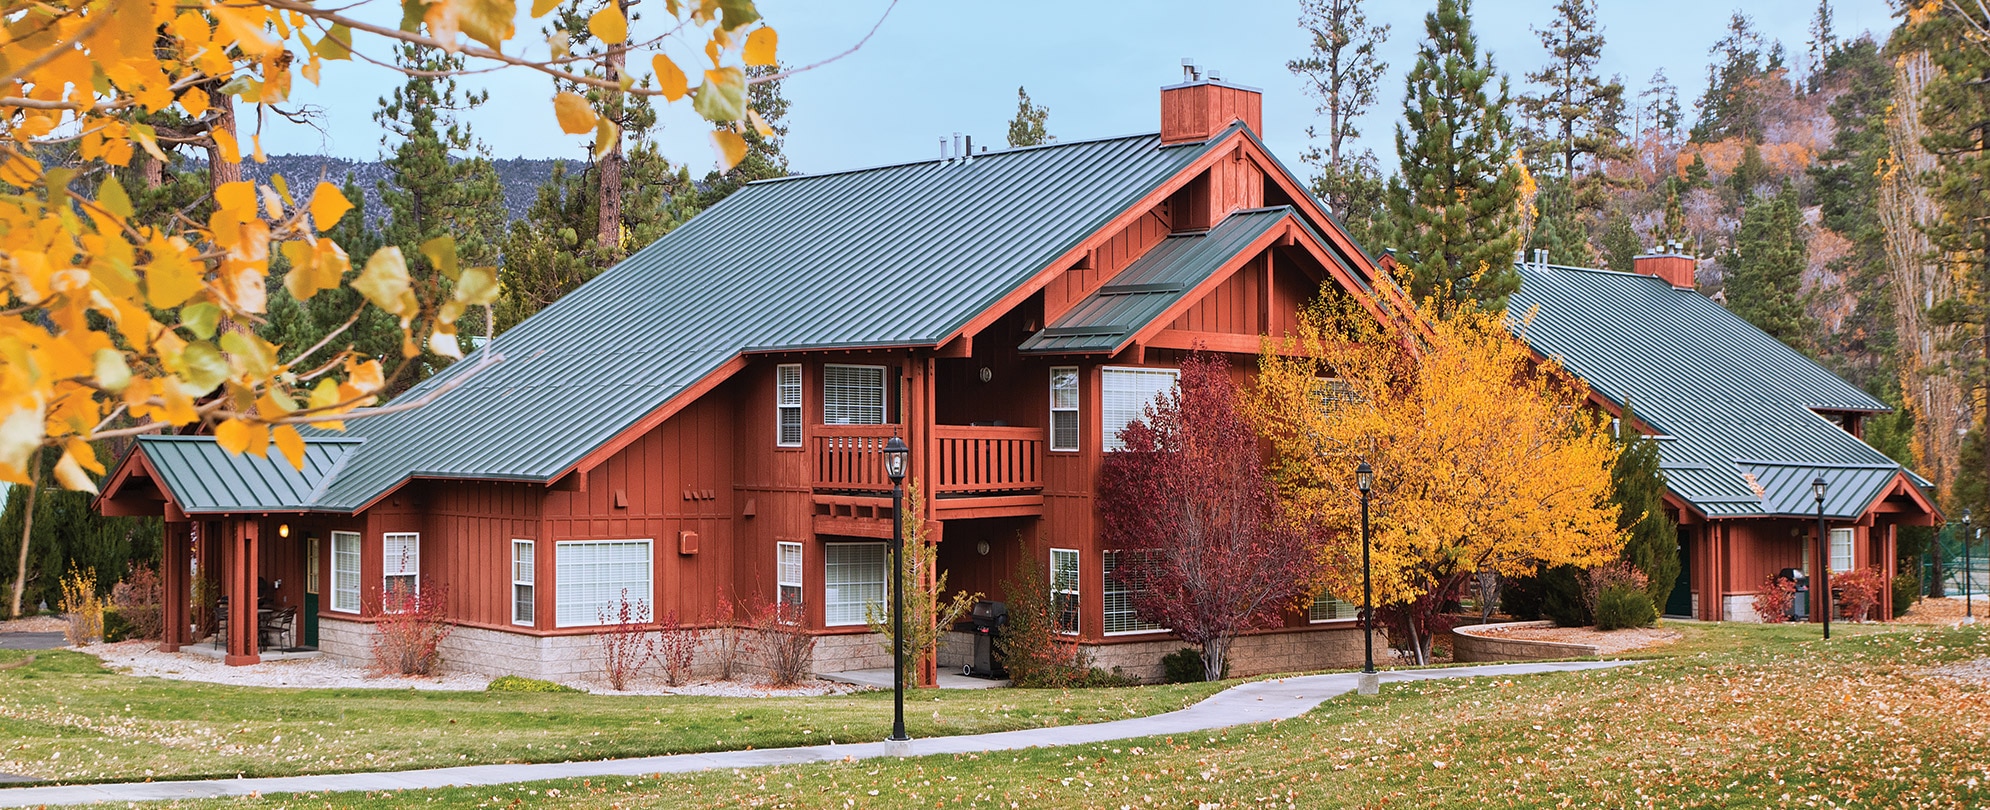 The exterior of WorldMark Big Bear, a cabin-style timeshare resort, surrounded by trees with autumn leaves.